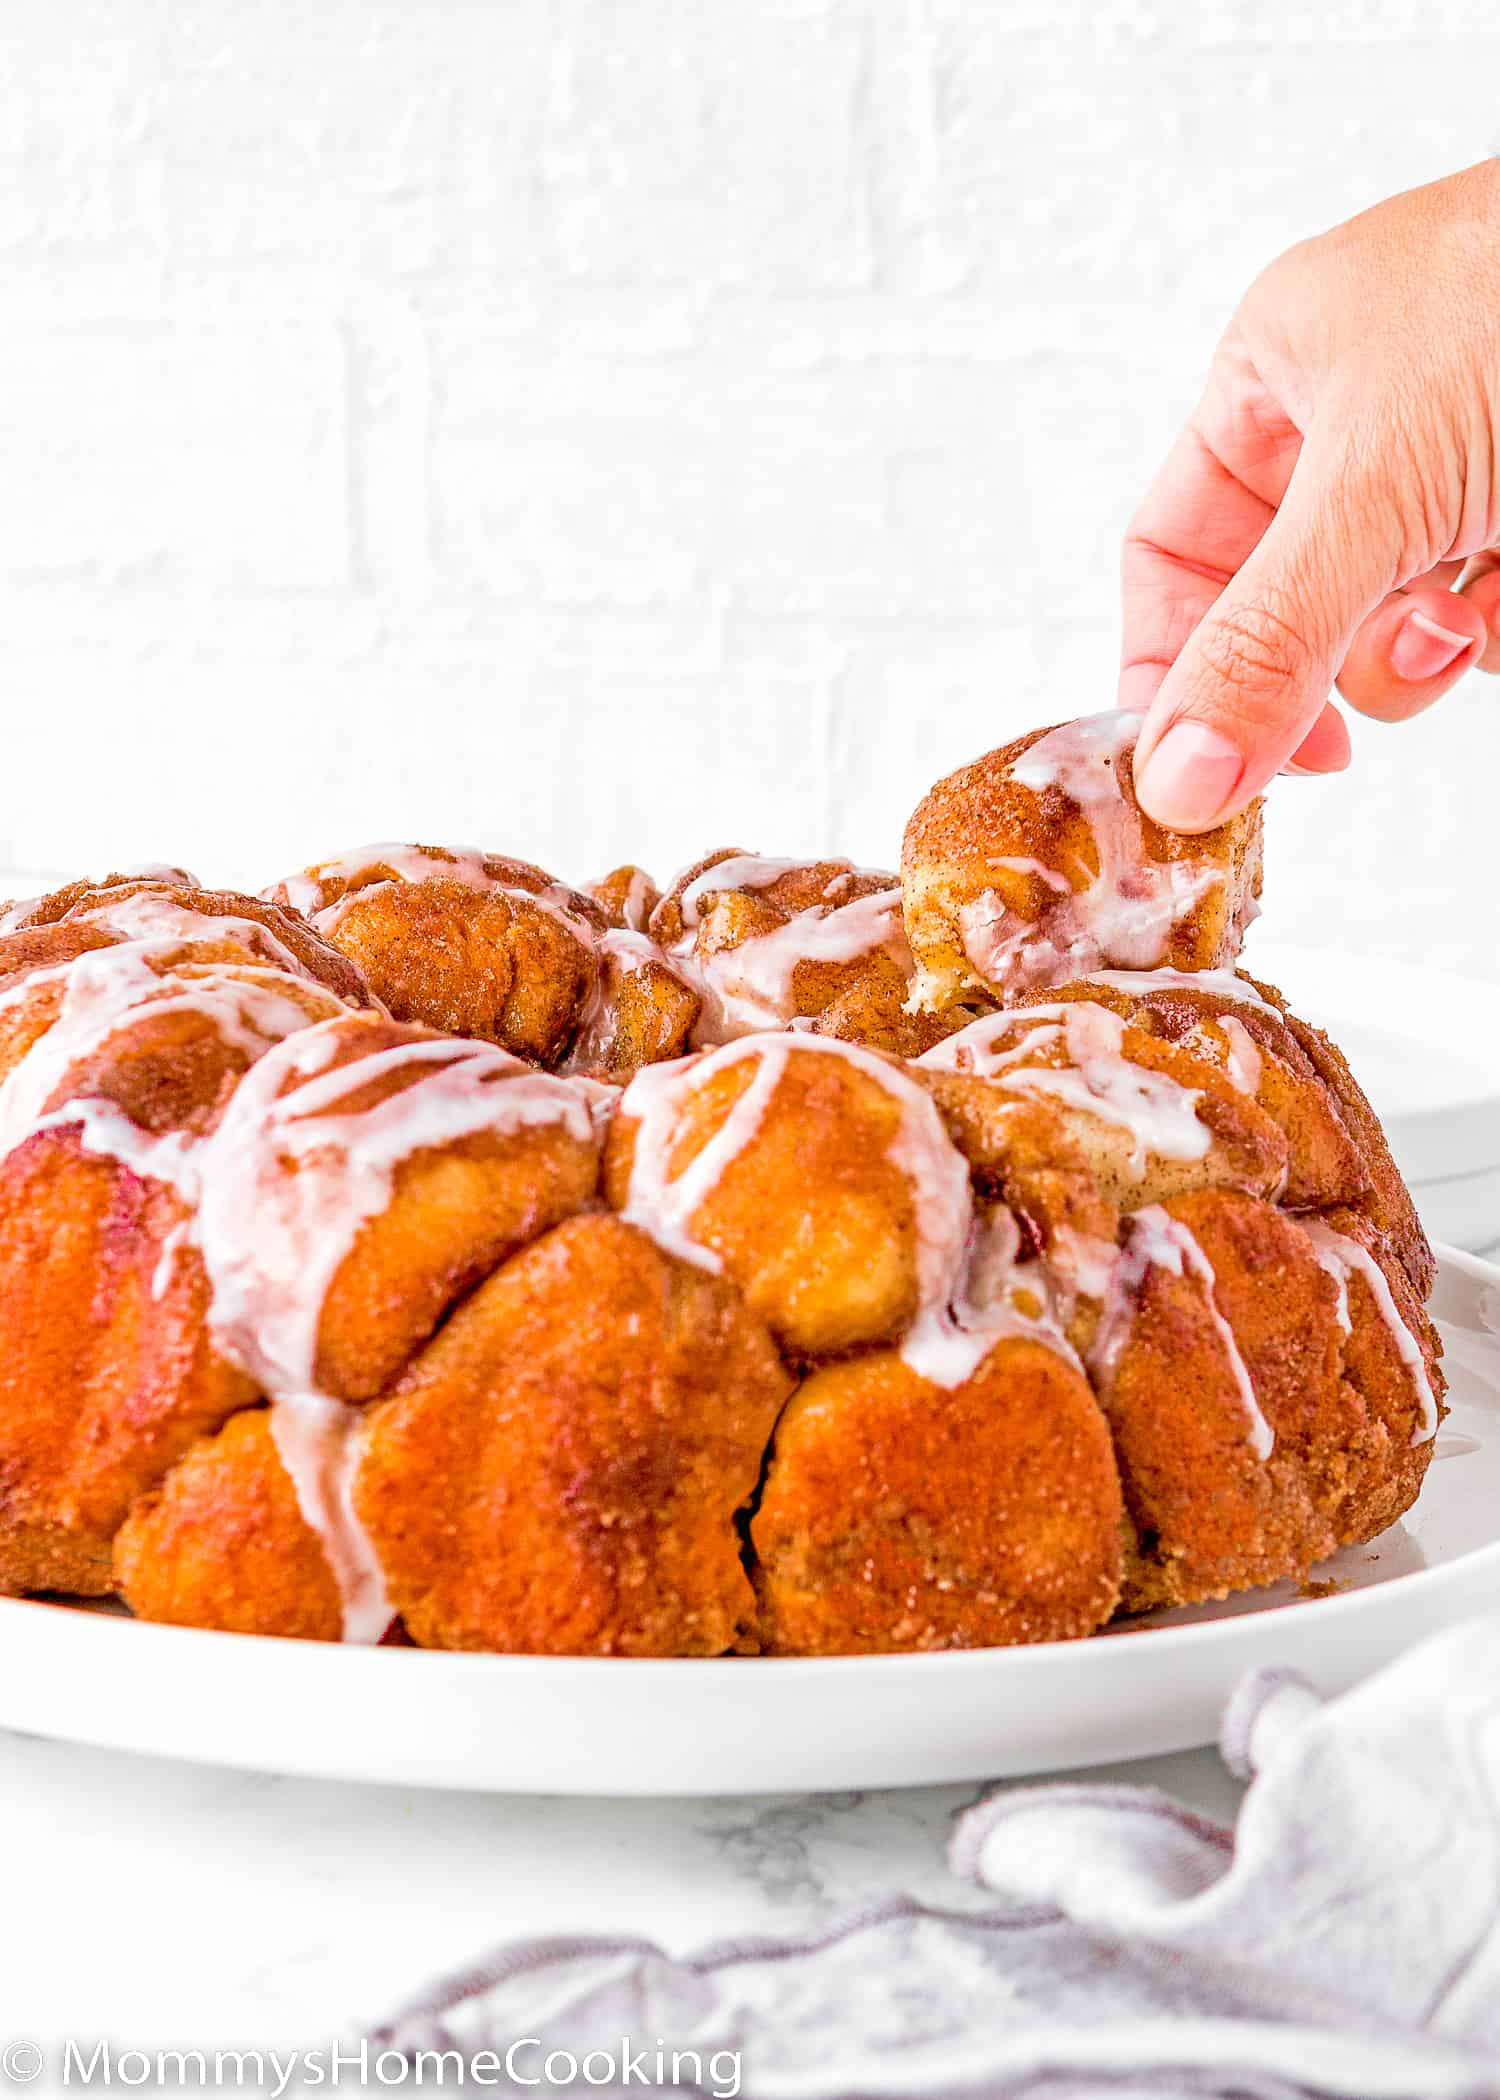 a hand taking a piece of Homemade Eggless Monkey Bread